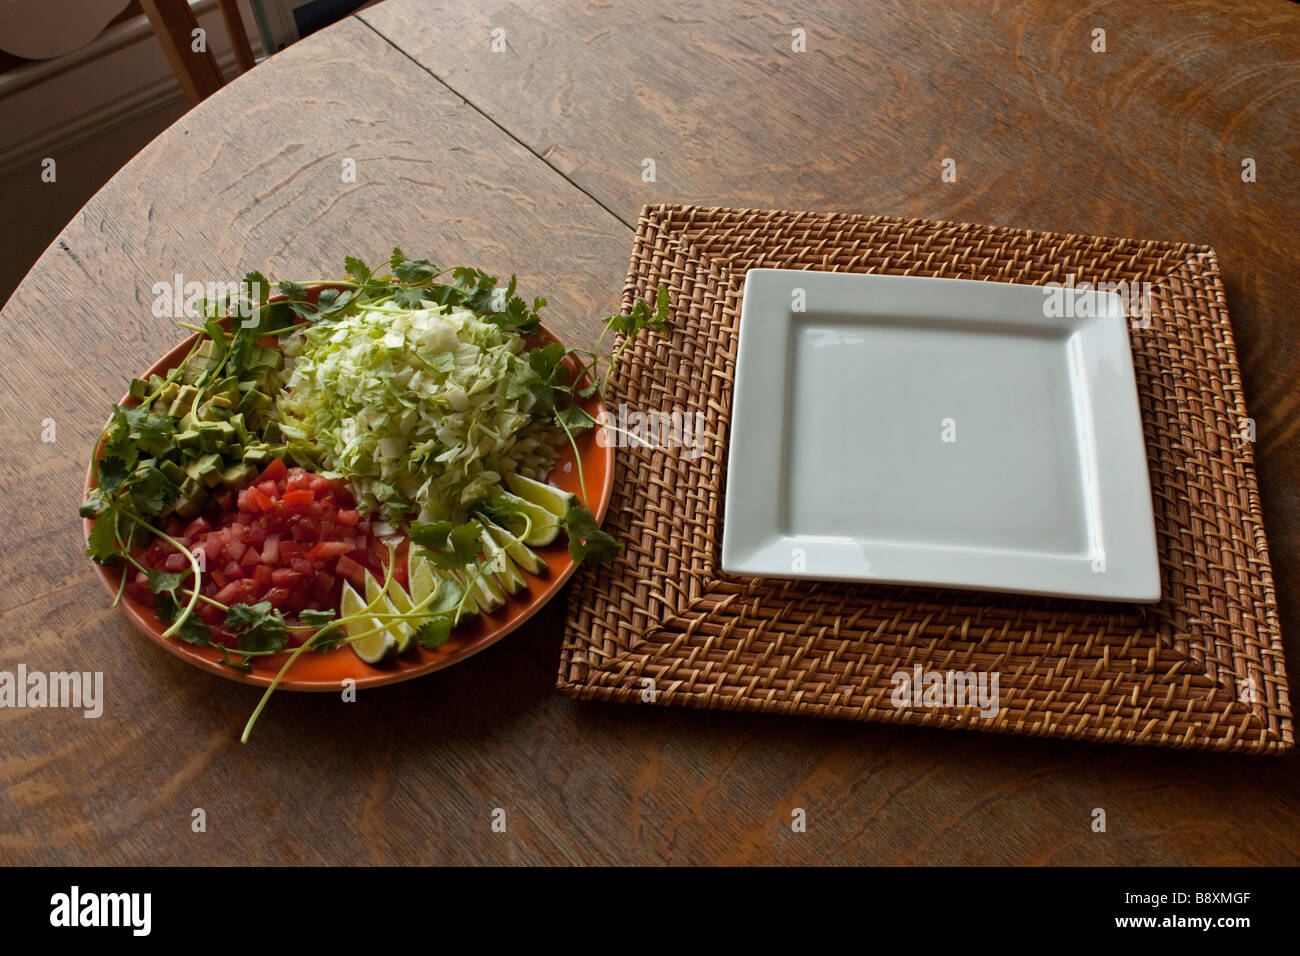 An empty plate on a bamboo charger and a platter of taco ingredients on an old wooden table Stock Photo